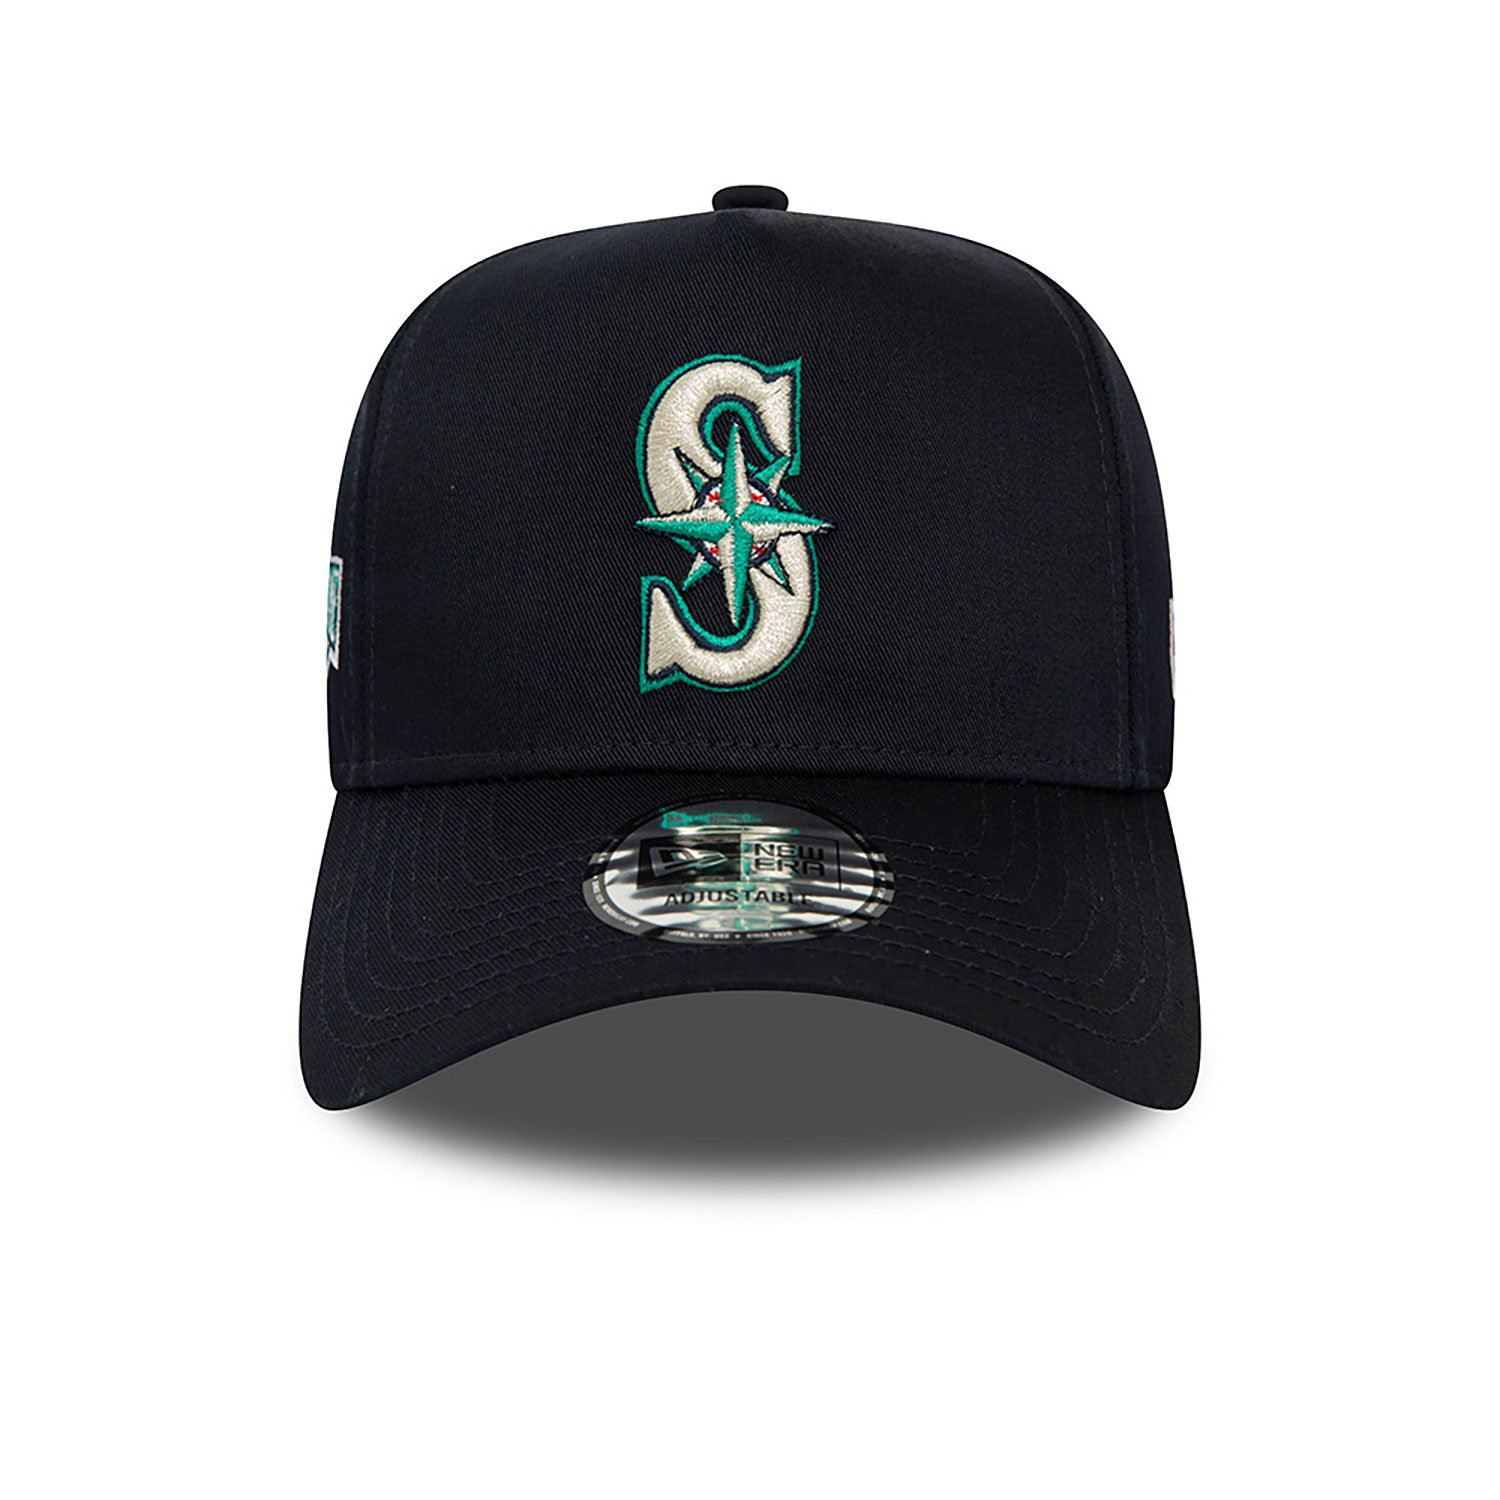 Seattle Mariners World Series Patch Navy 9FORTY E-Frame Adjustable Cap